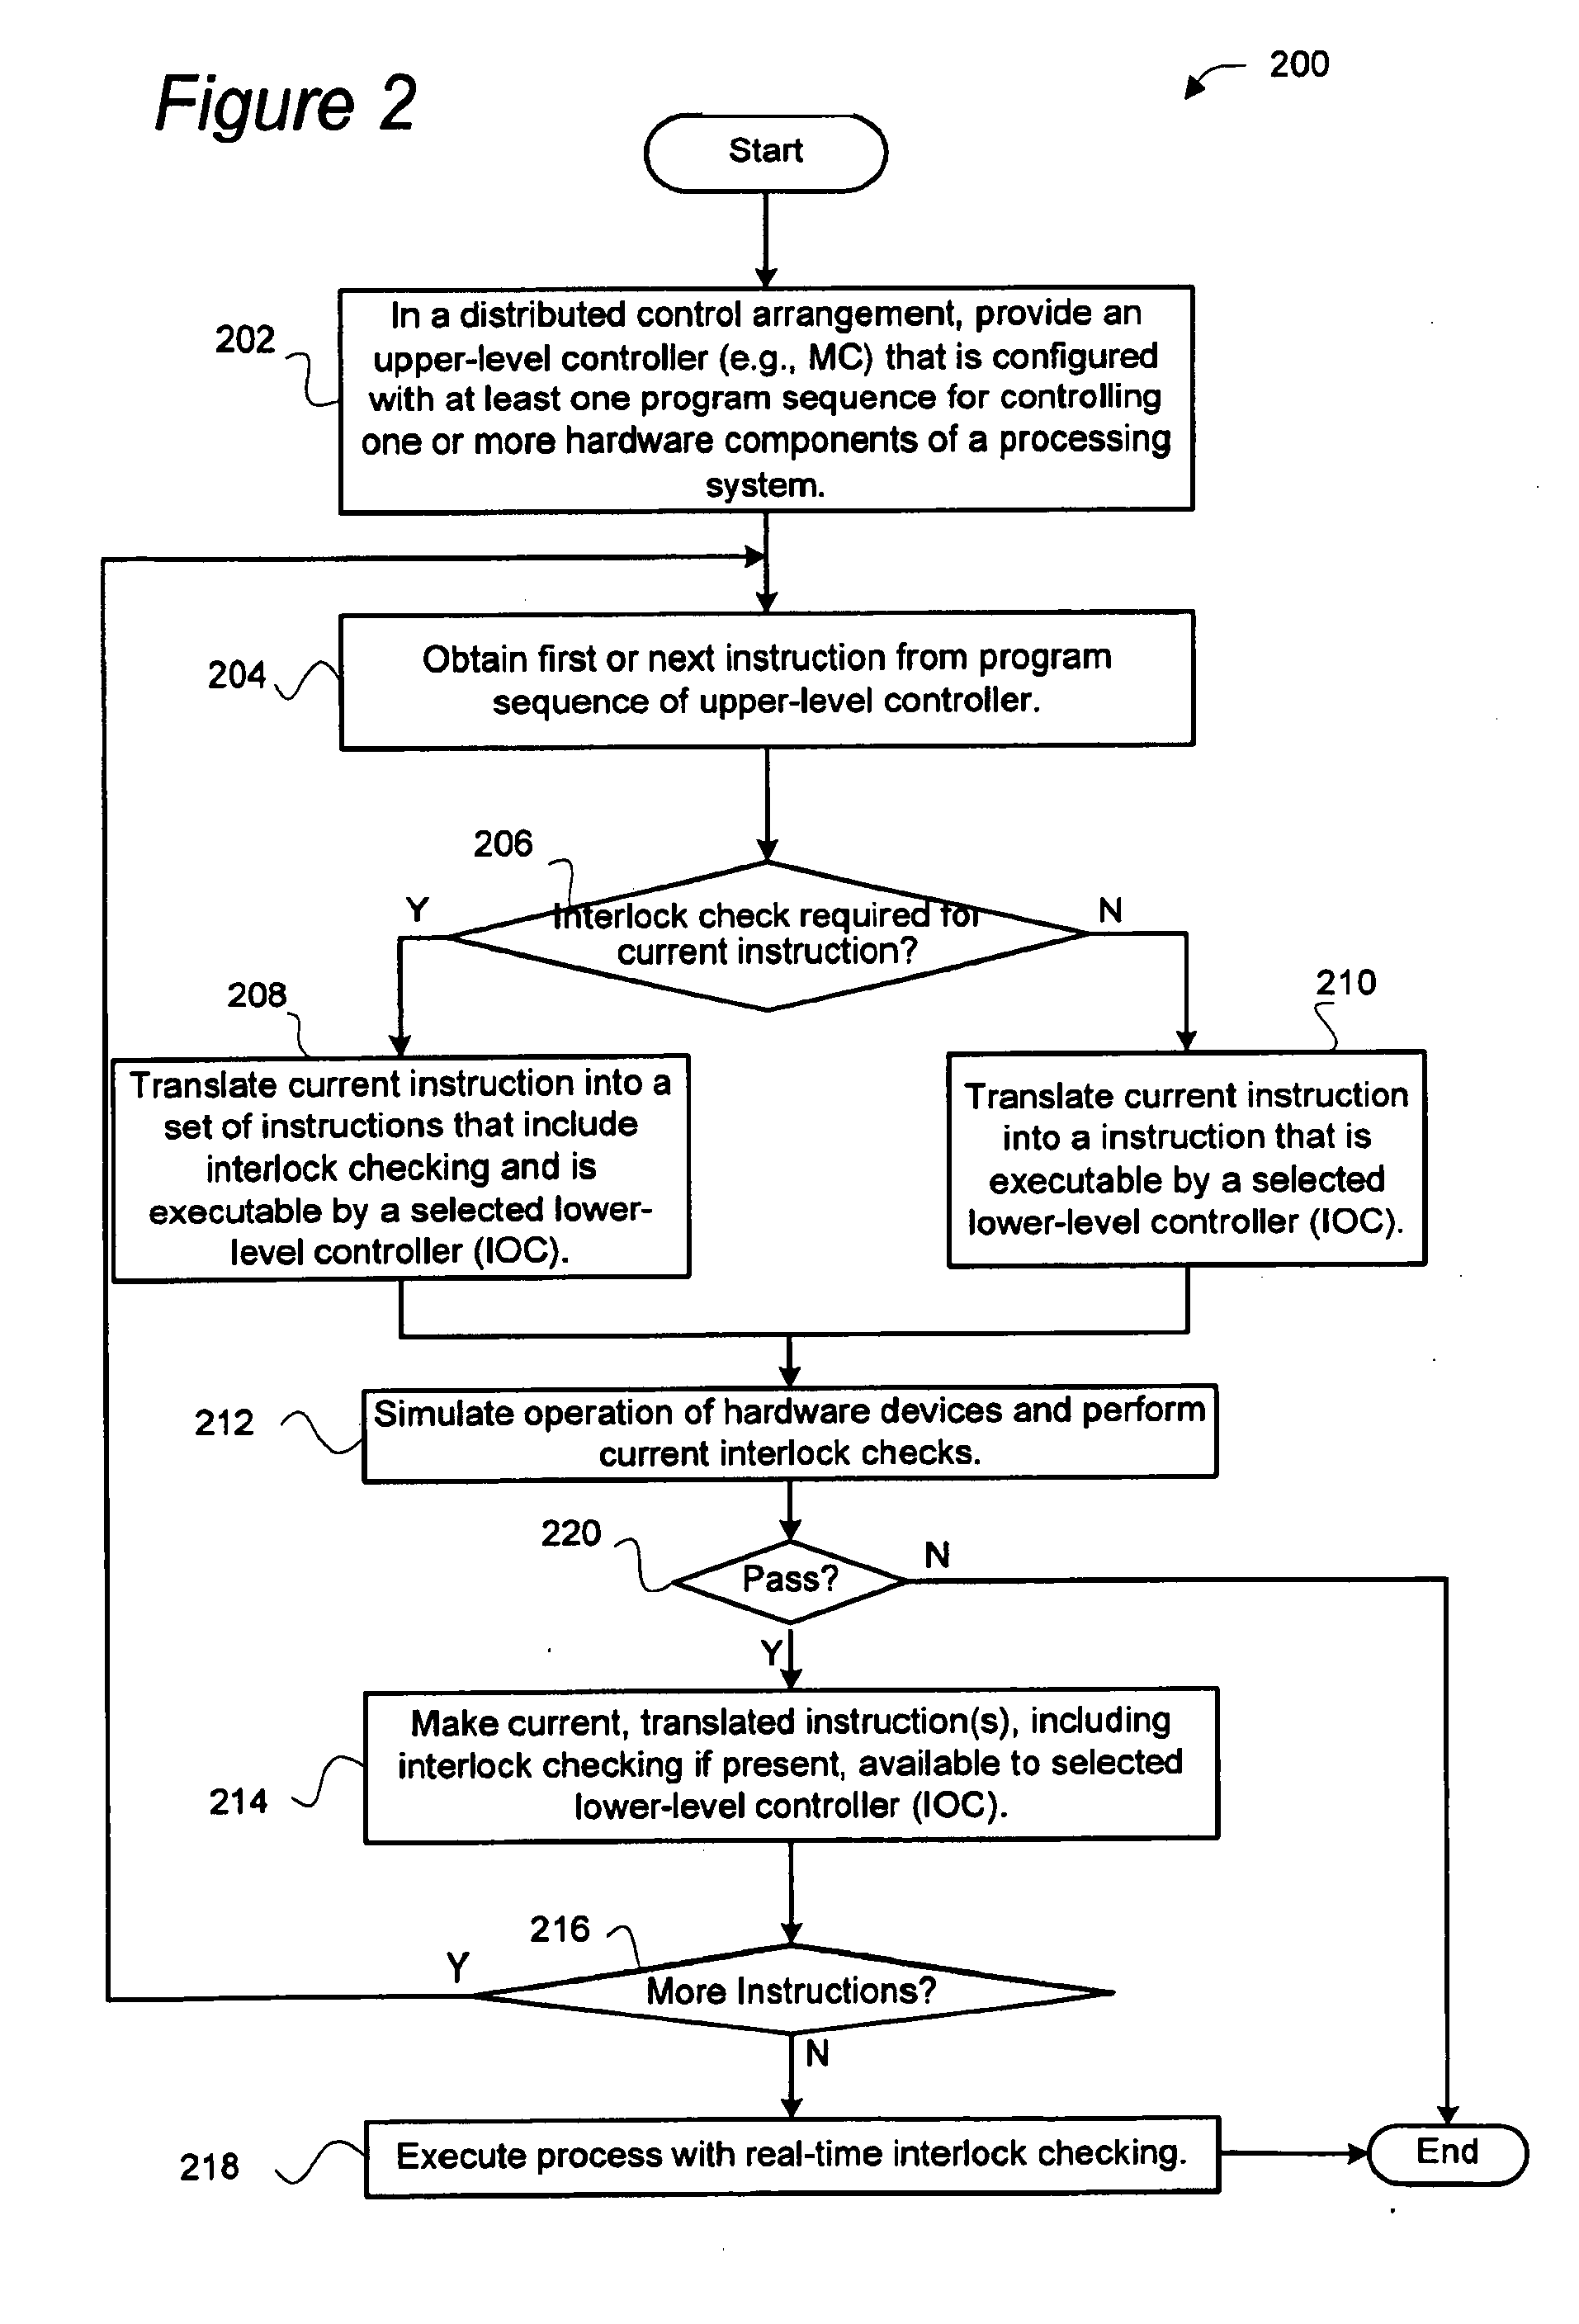 Apparatus and methods for precompiling program sequences for wafer processing